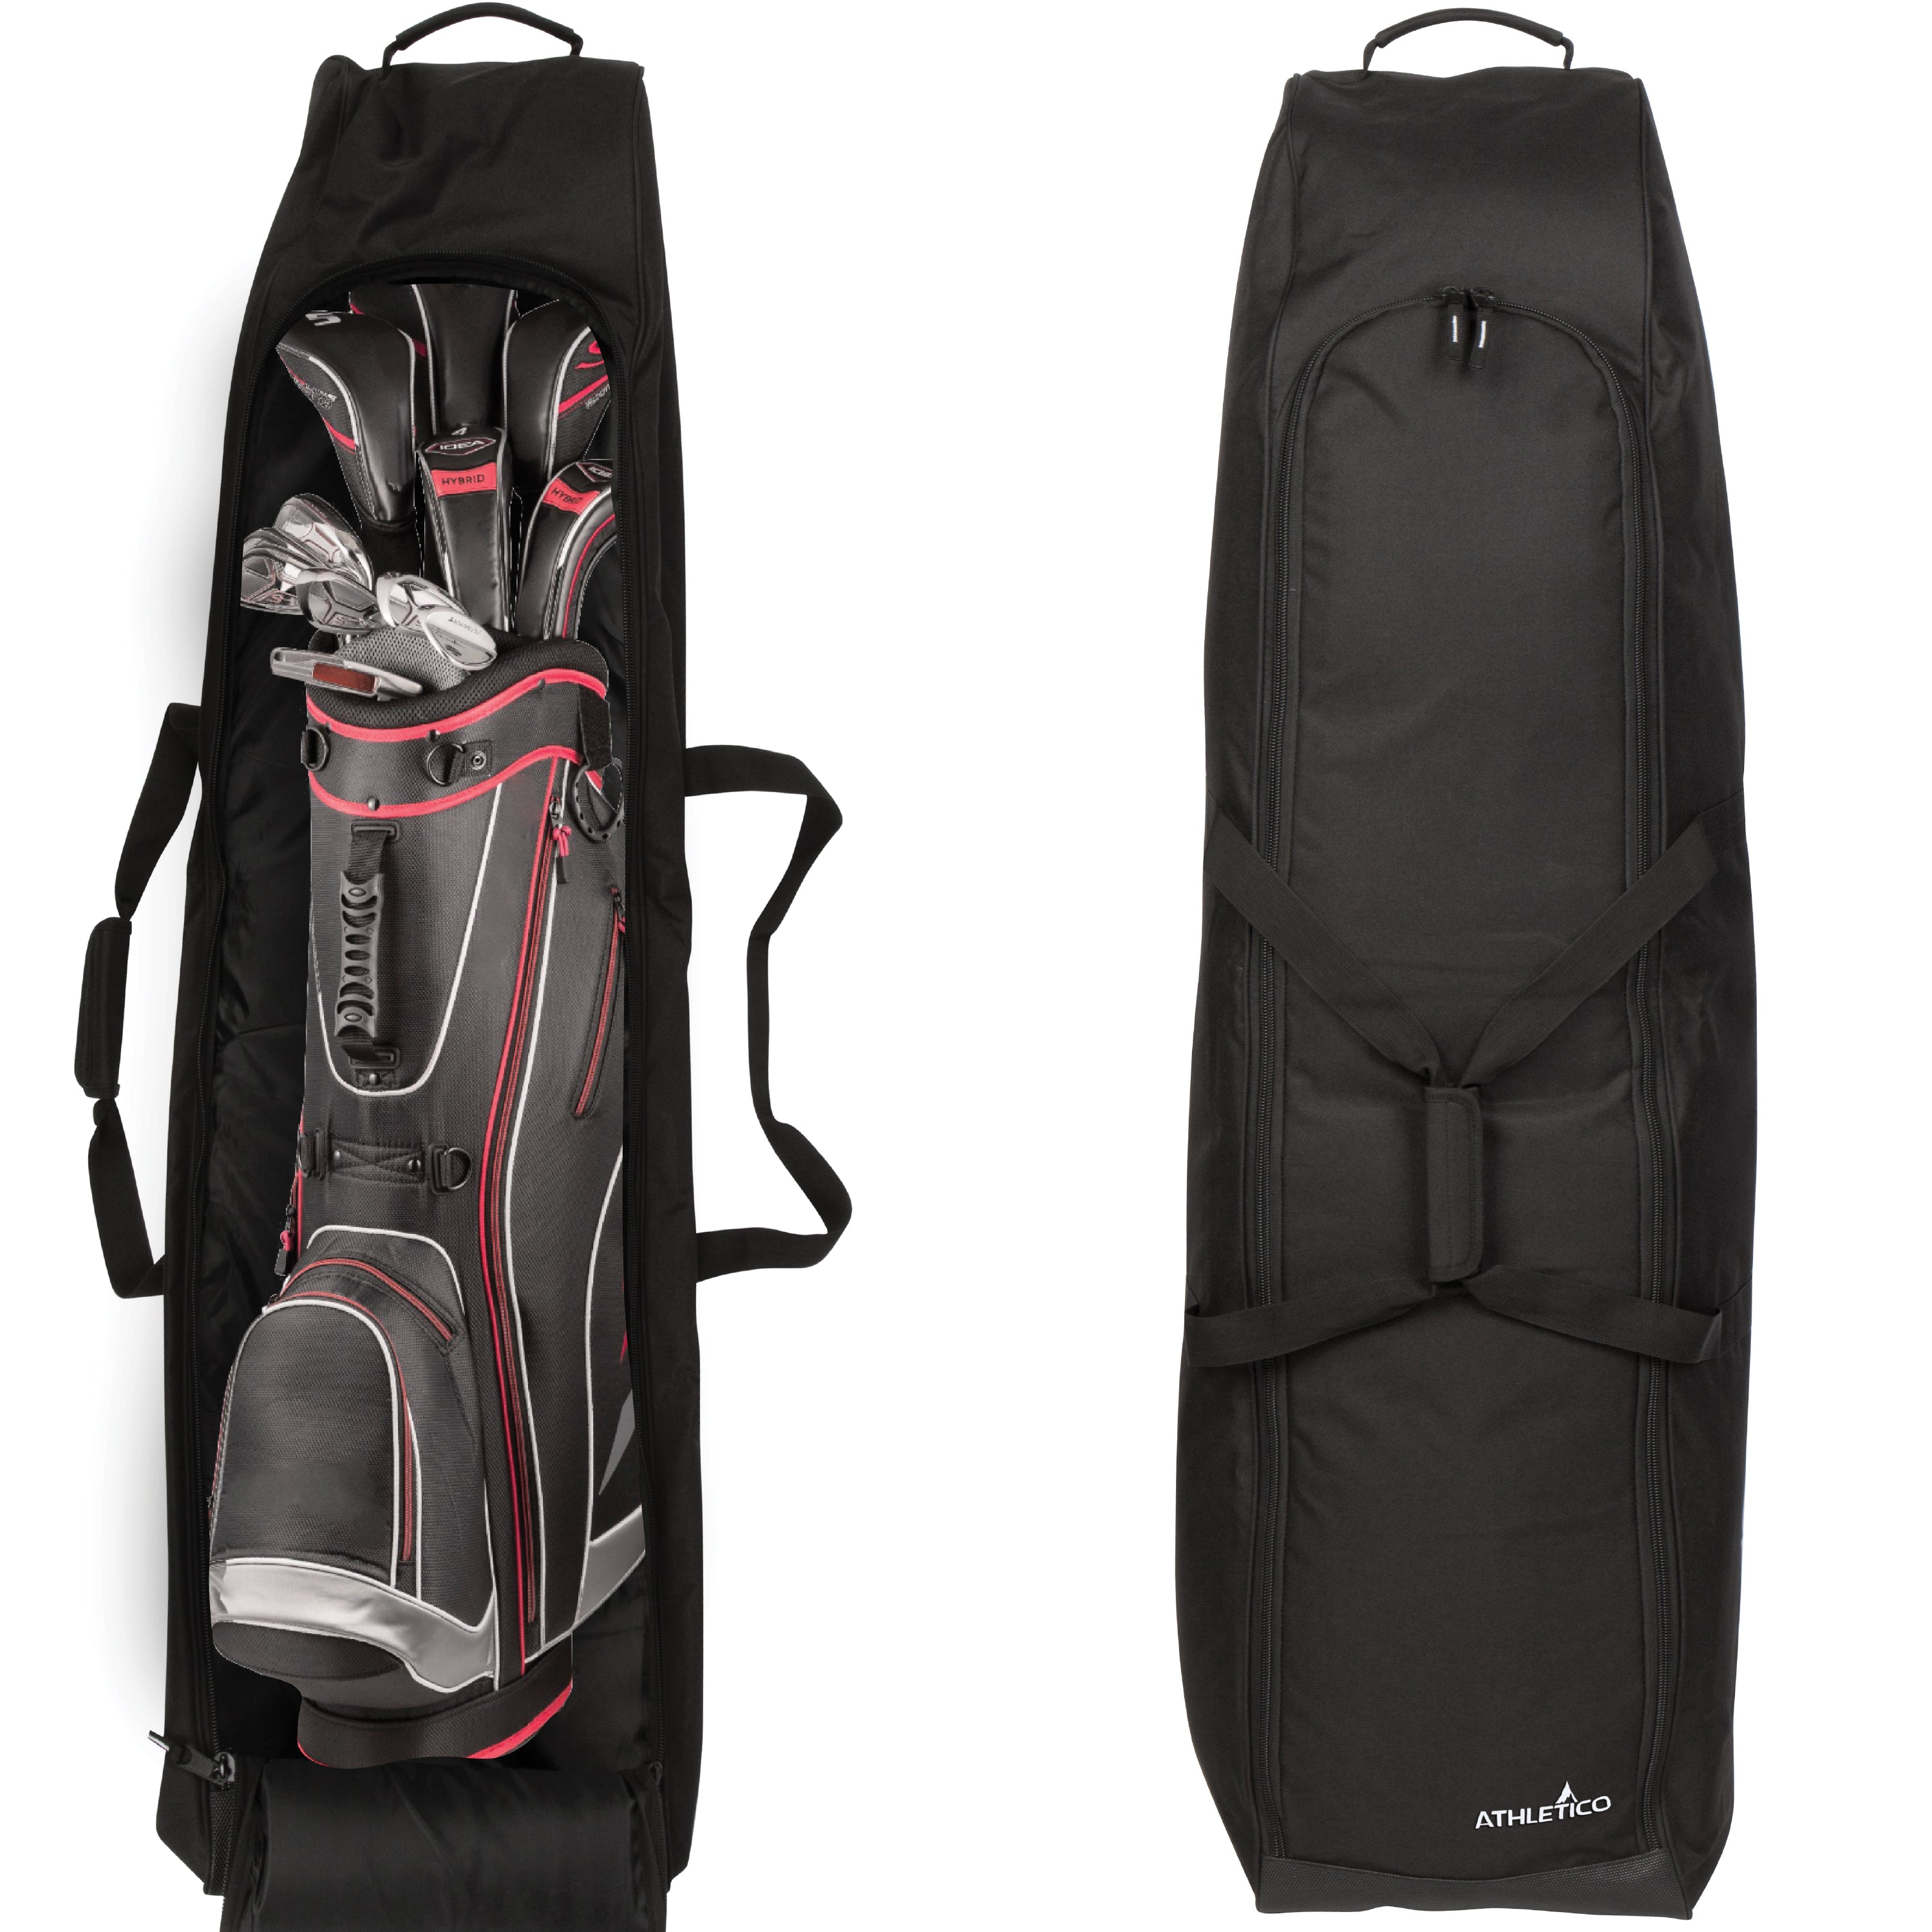 Golf Travel Bags For Airlines With Wheels Padded Around Top Golf